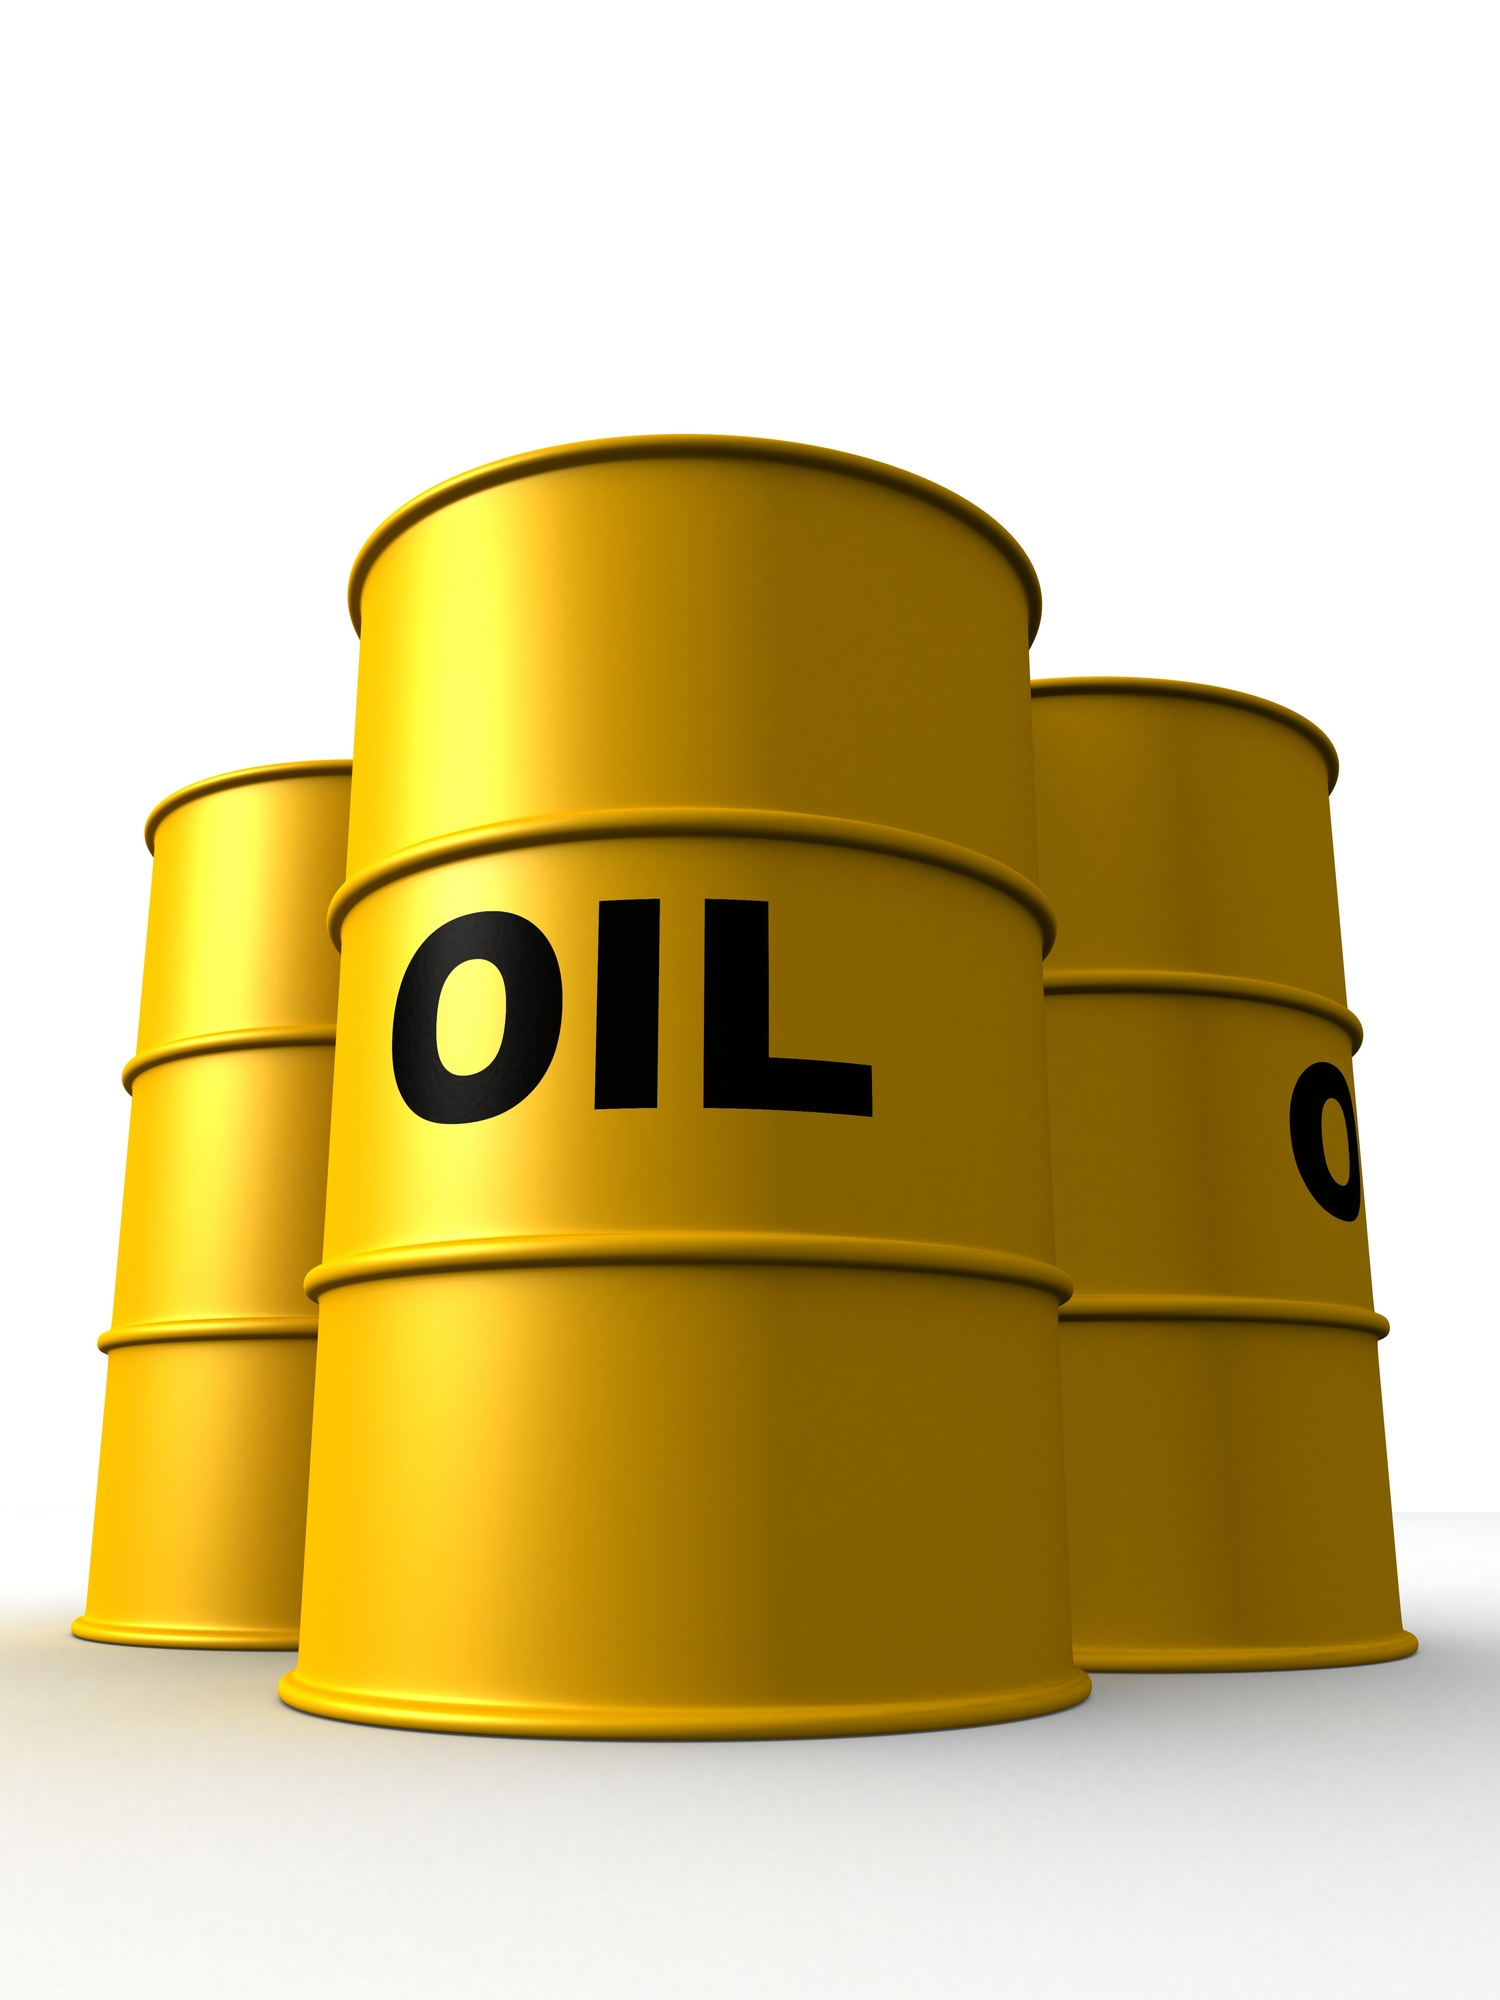 The opportunity to cash in on low oil prices is now! Find out how at www.cegholdings.com